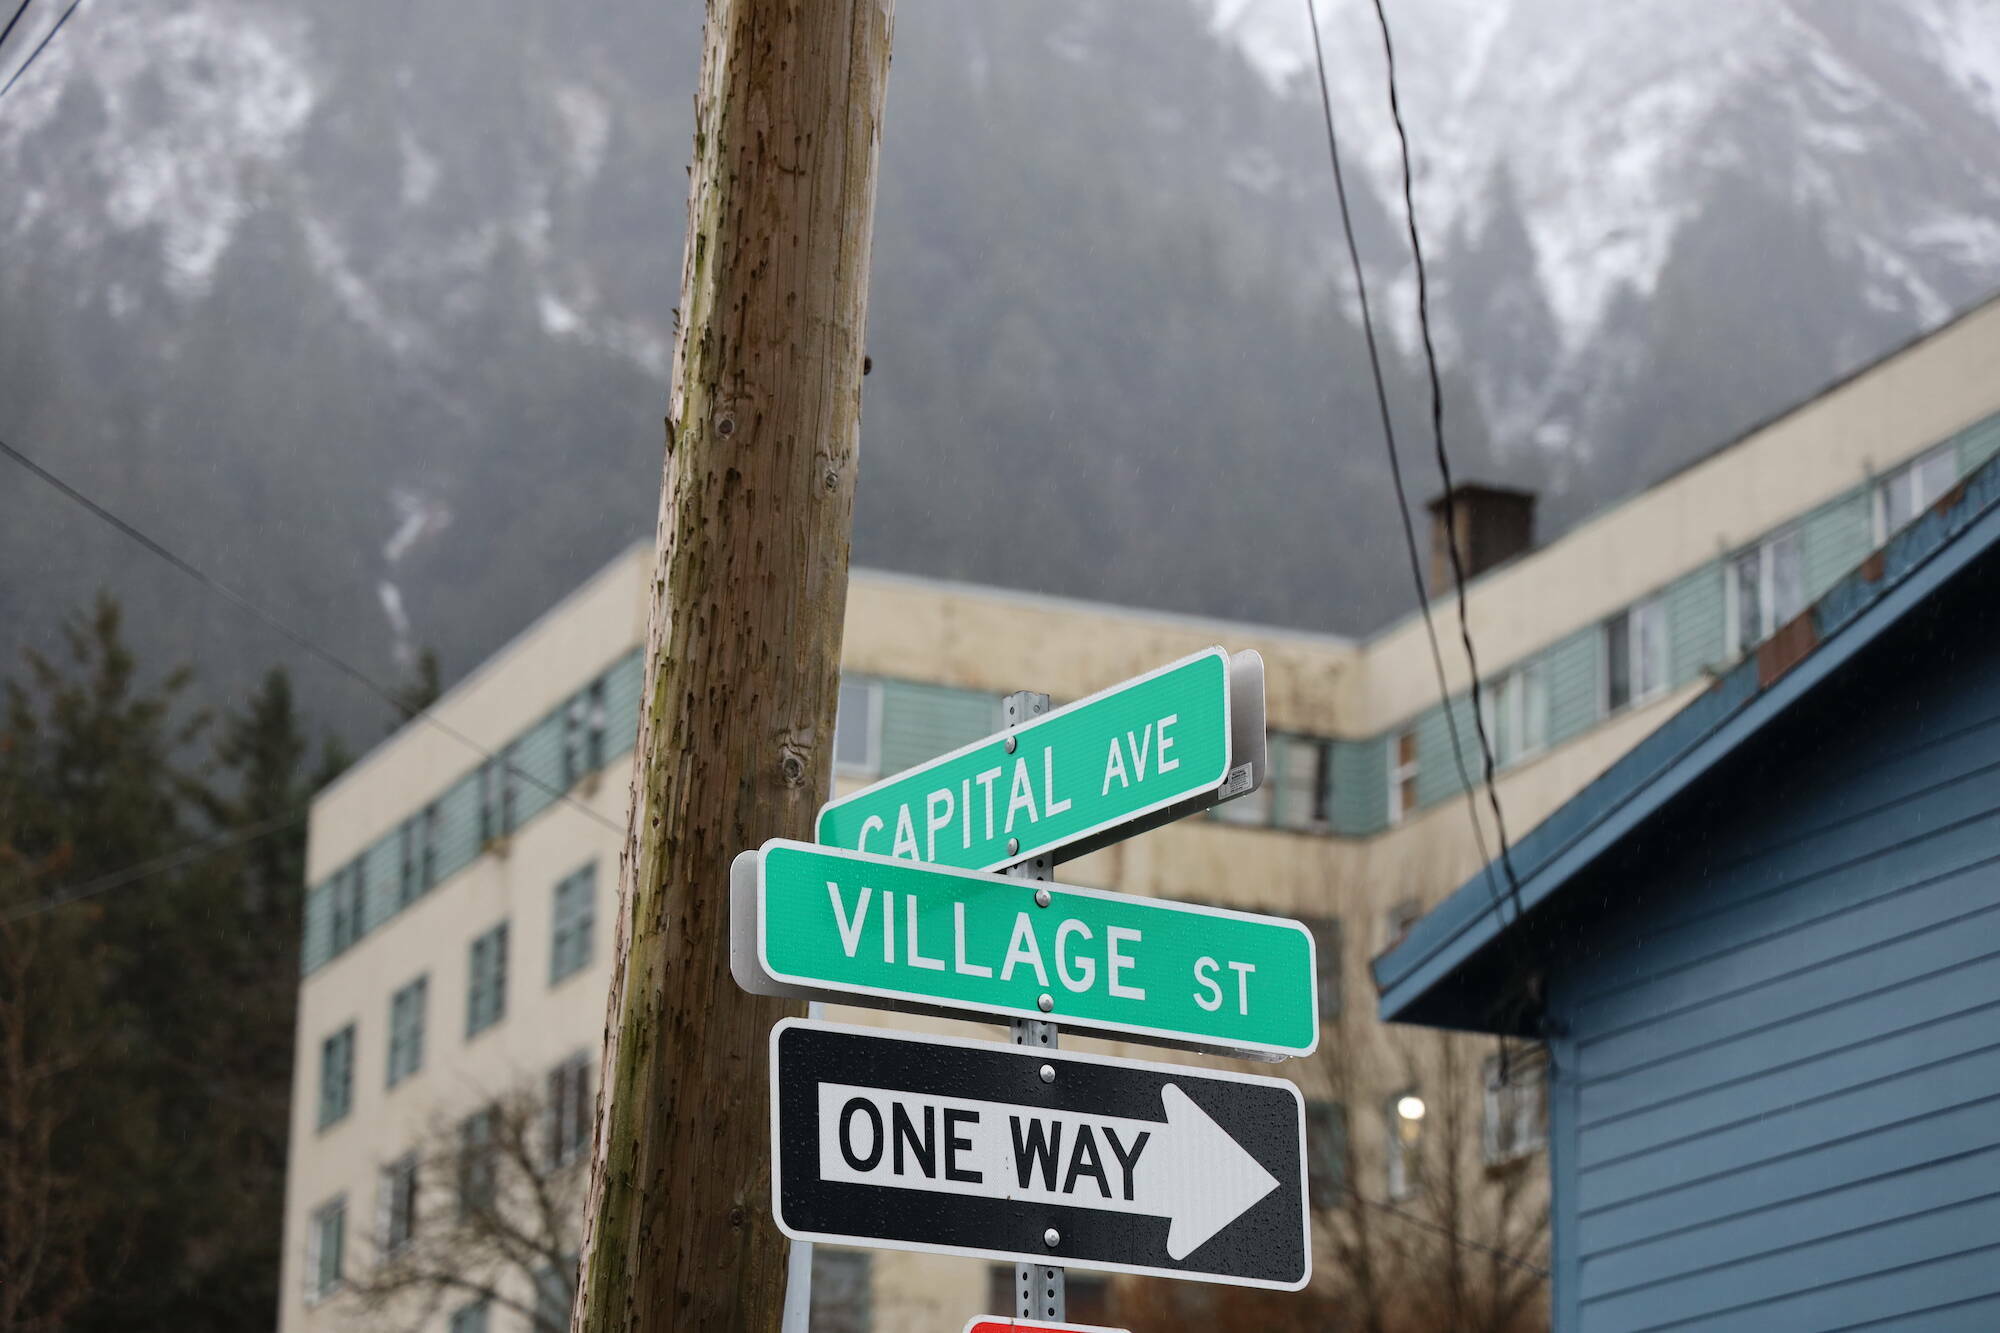 A parcel of land just off the corner of Capital Ave. and Village Street in downtown Juneau was approved to be the first parcel of land owned by the Central Council of the Tlingit and Haida Indian Tribes of Alaska to be put into federal trust. However, the state of Alaska has filed a lawsuit against the federal government seeking to reverse the federal government’s decision, return the land to Tlingit and Haida, and stop future land-into-trust applications. (Clarise Larson / Juneau Empire file photo)